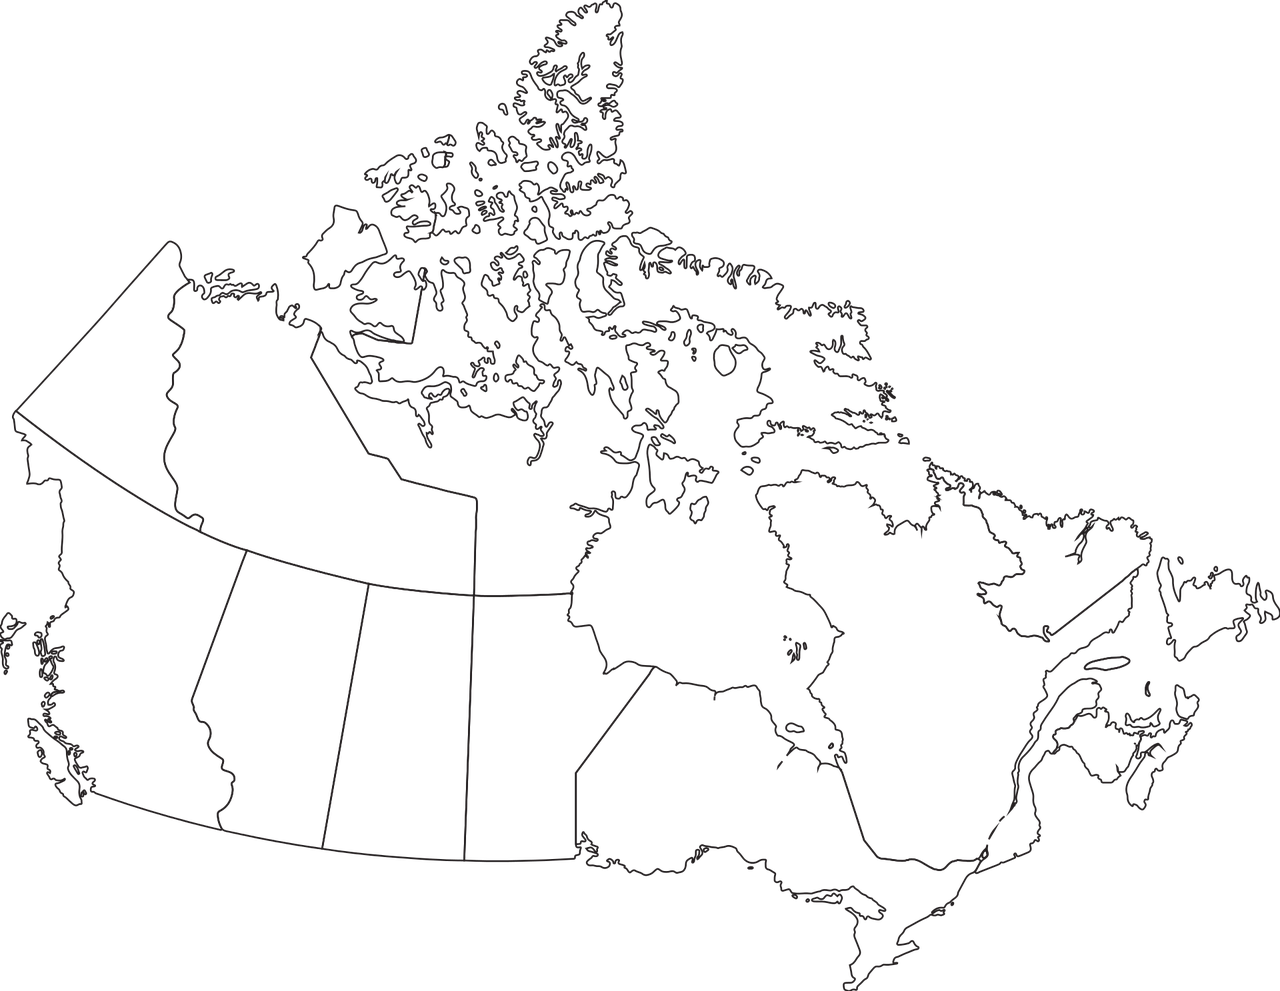 Map of Data Science Jobs Across Canada